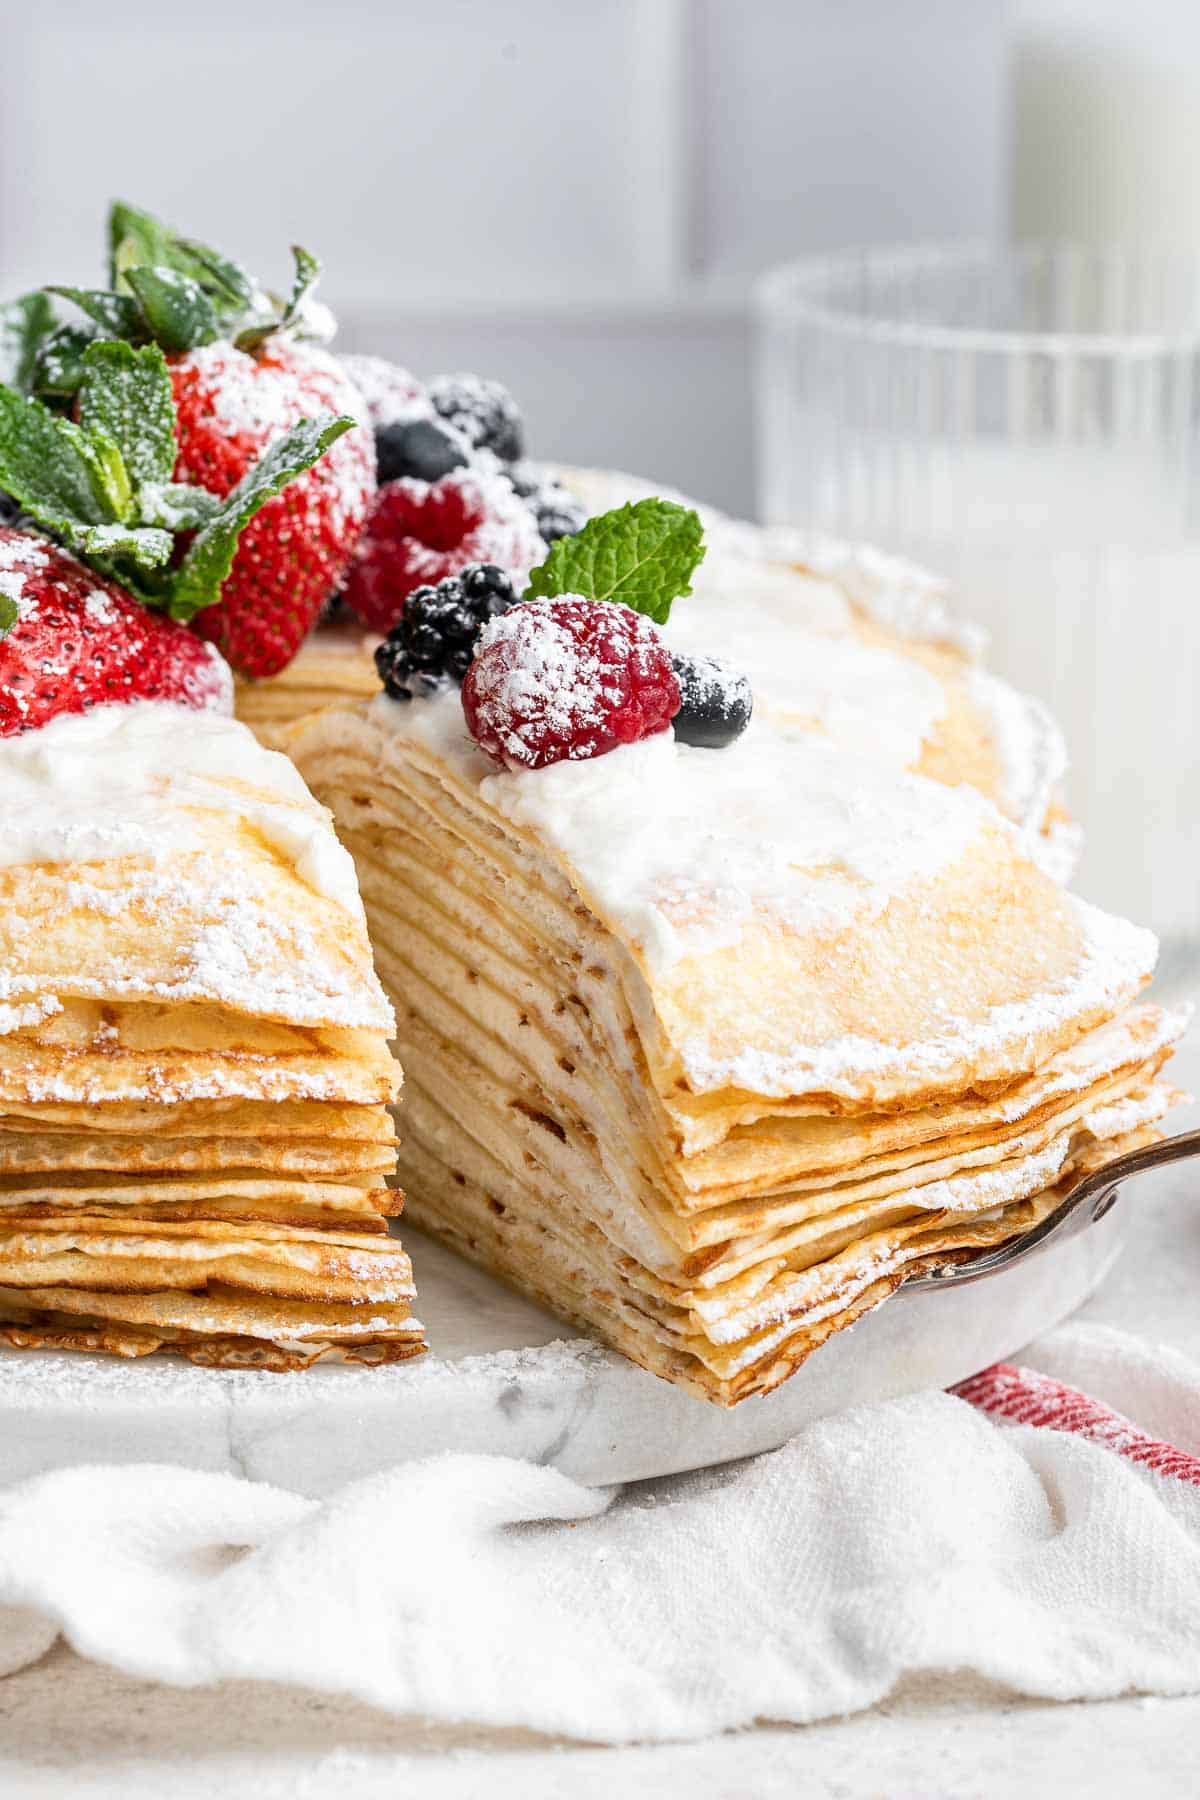 A slice of crepe cake being removed from a whole cake with fresh berries on top.